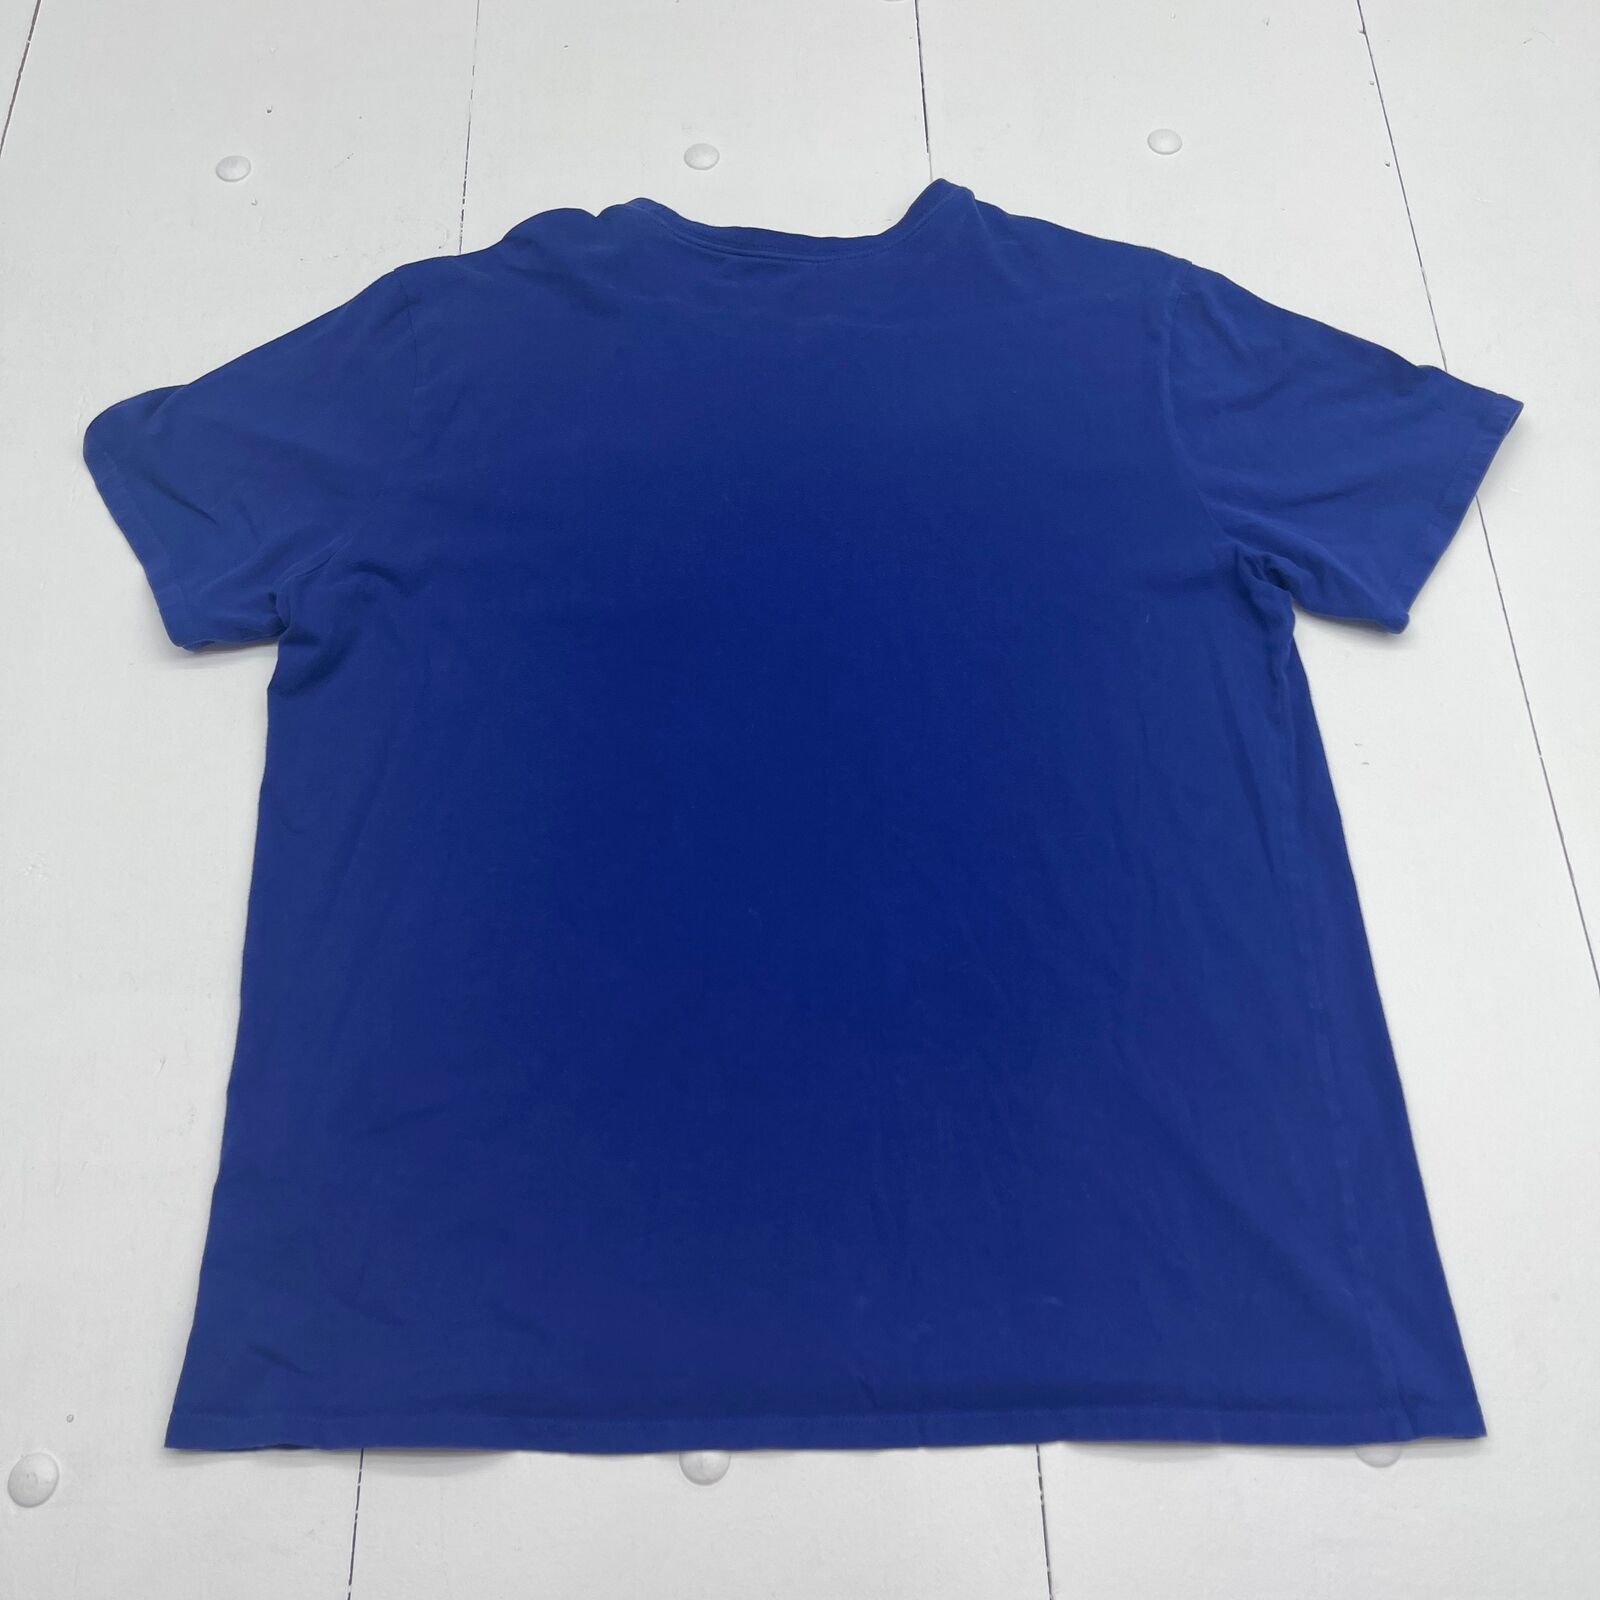 plain blue shirt front and back